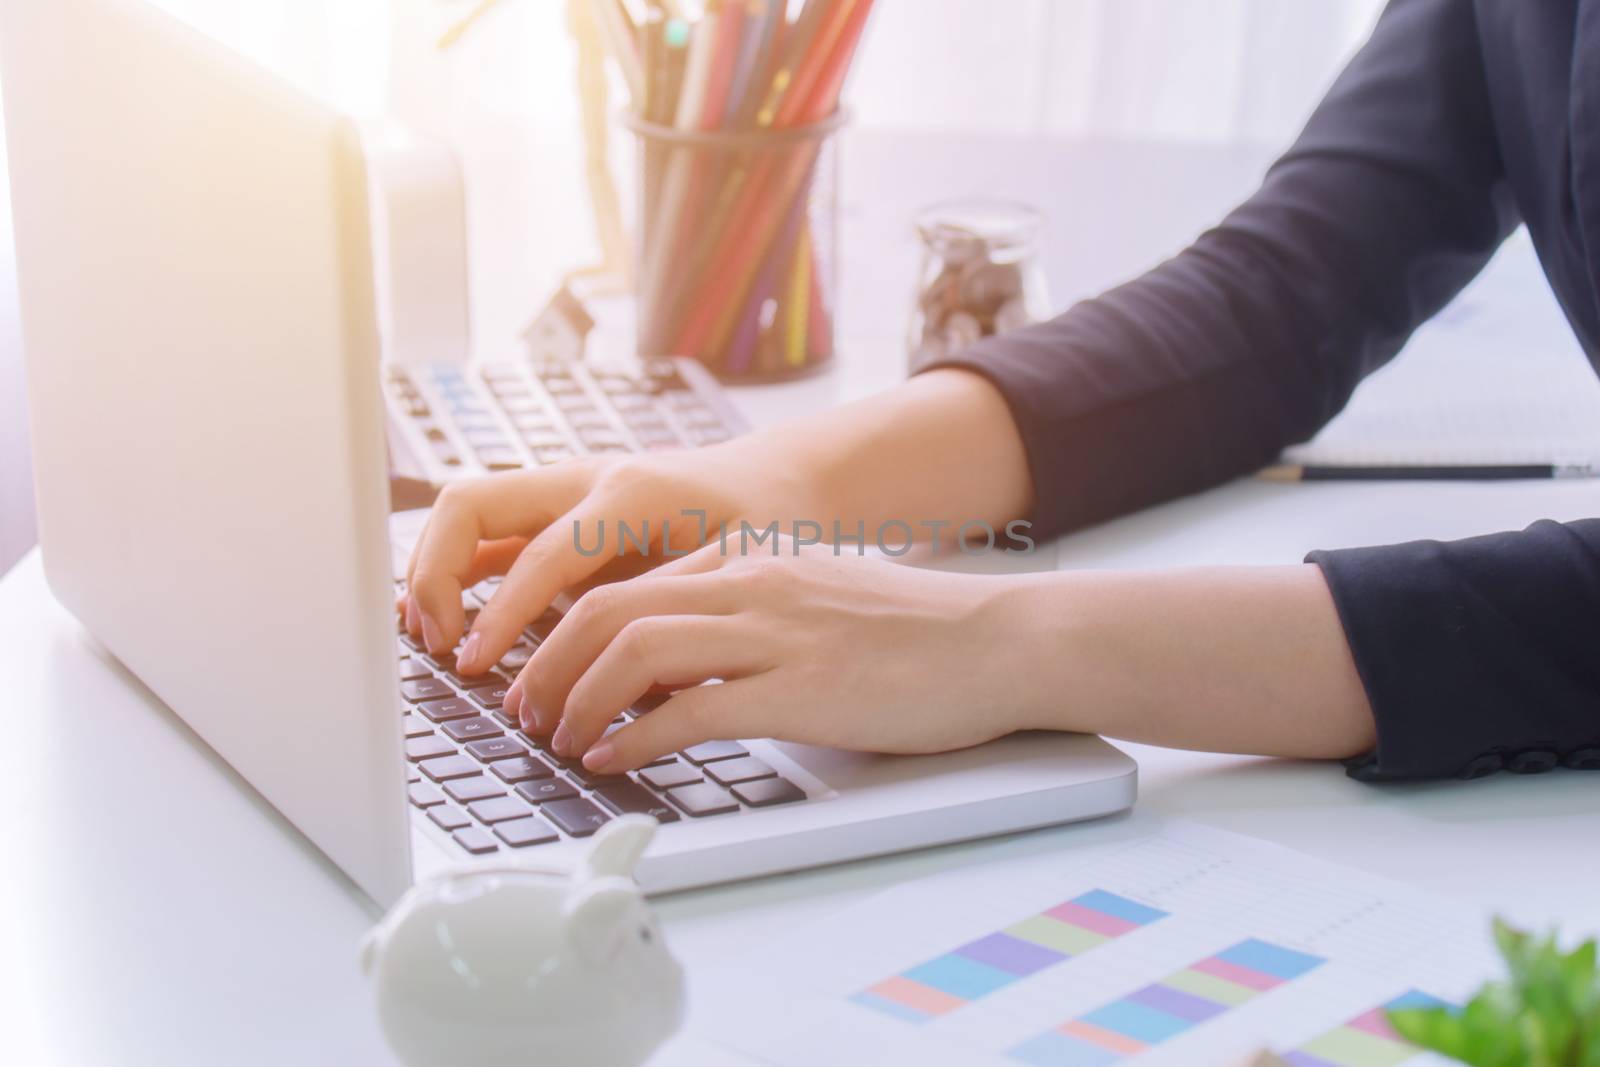 A young business woman using laptop computer on the table, Looking for direction and inspiration.